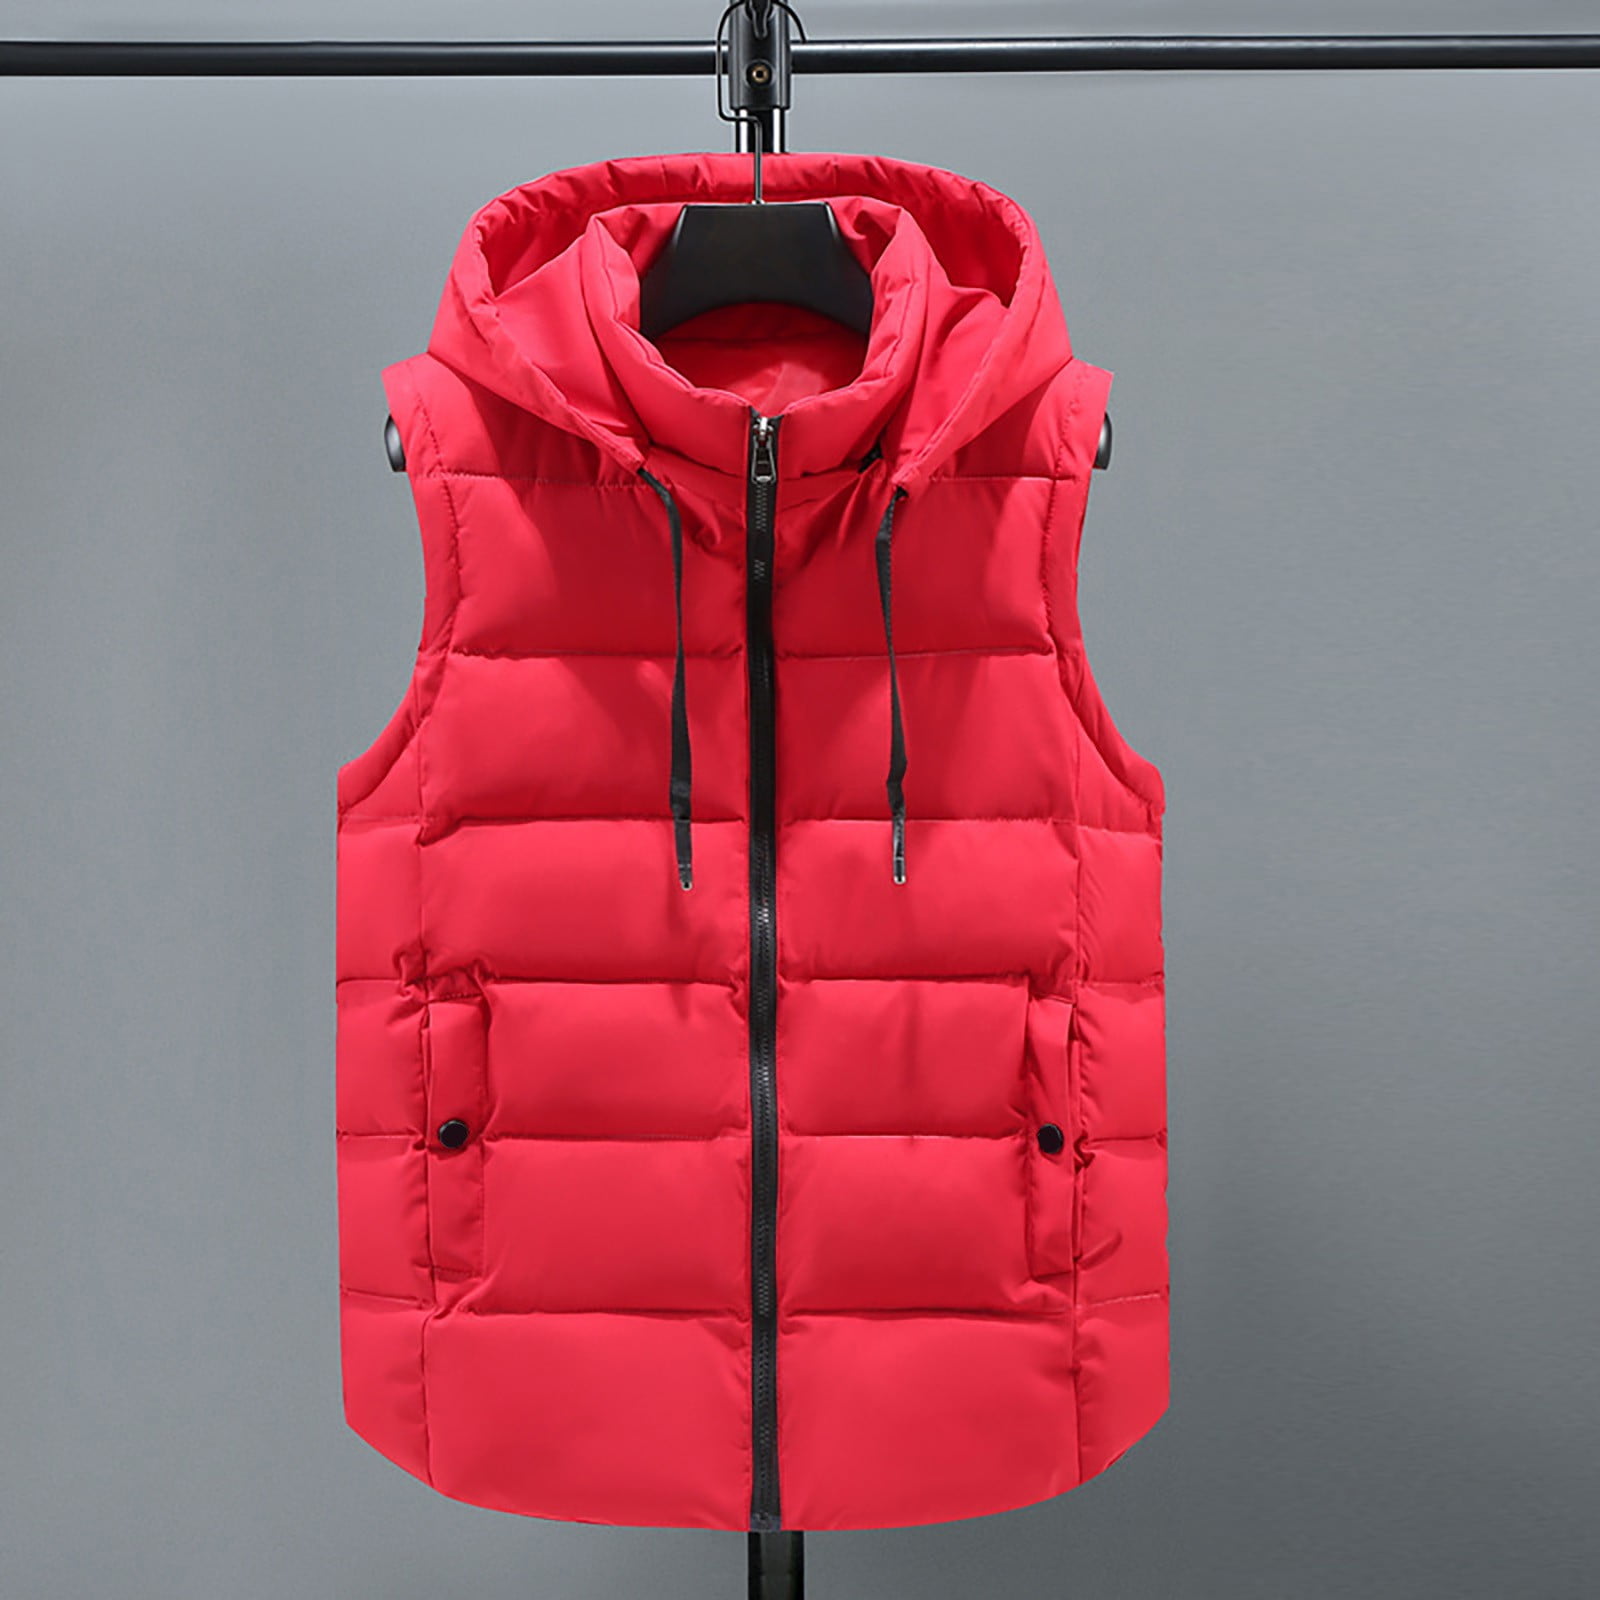 CAICJ98 Puffer Vest Women Plus Size Women Quilted Lightweight Vest Outdoor  Casual Puffer Vest Warm Winter Coat with Removable Hood Red,4XL